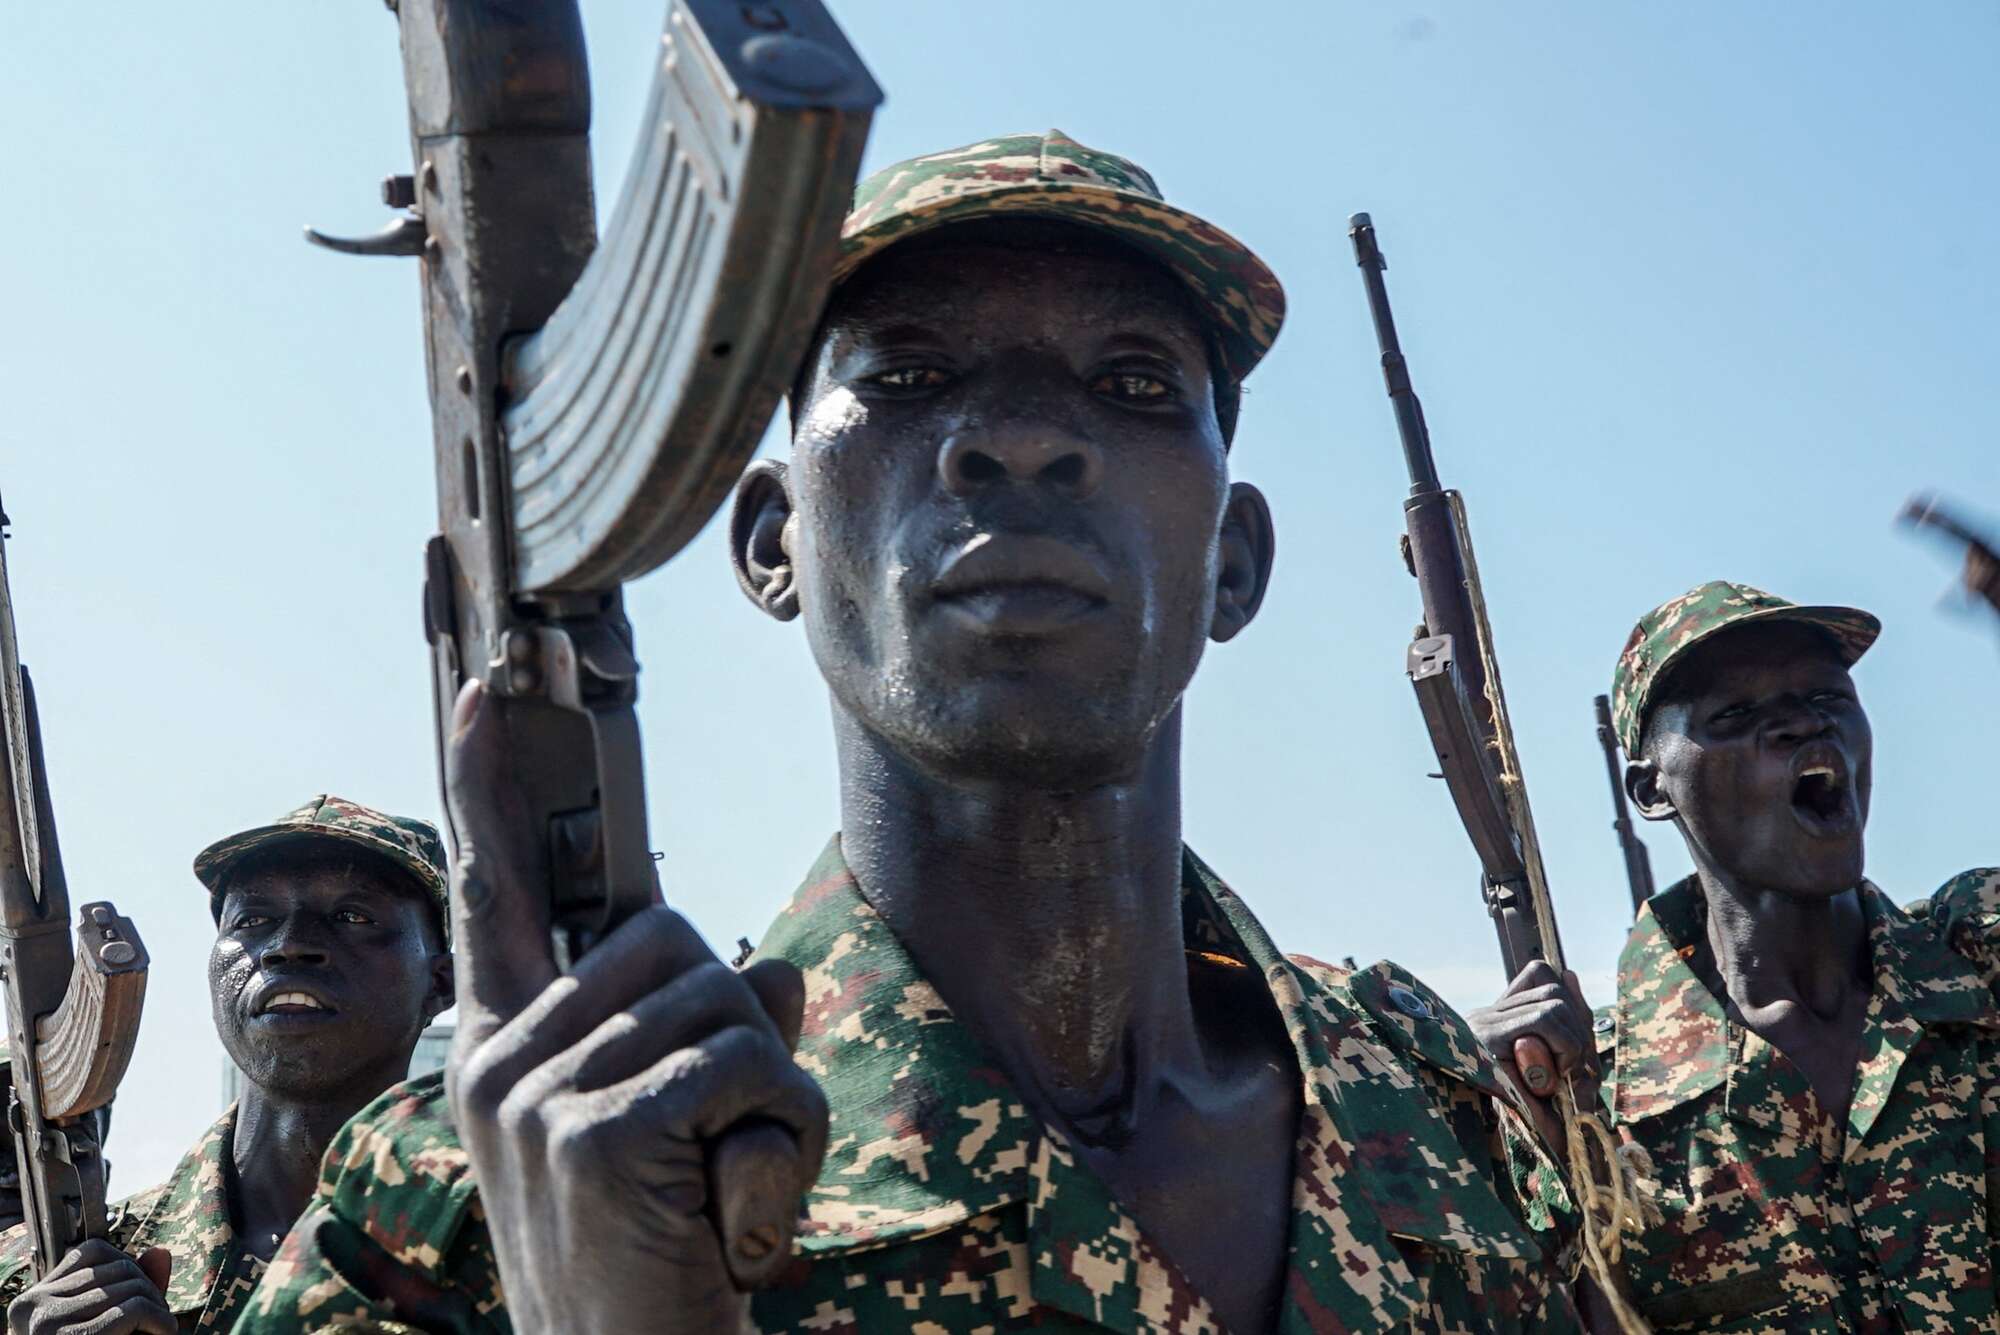 The conflict goes on': South Sudan's never-ending war - The East African